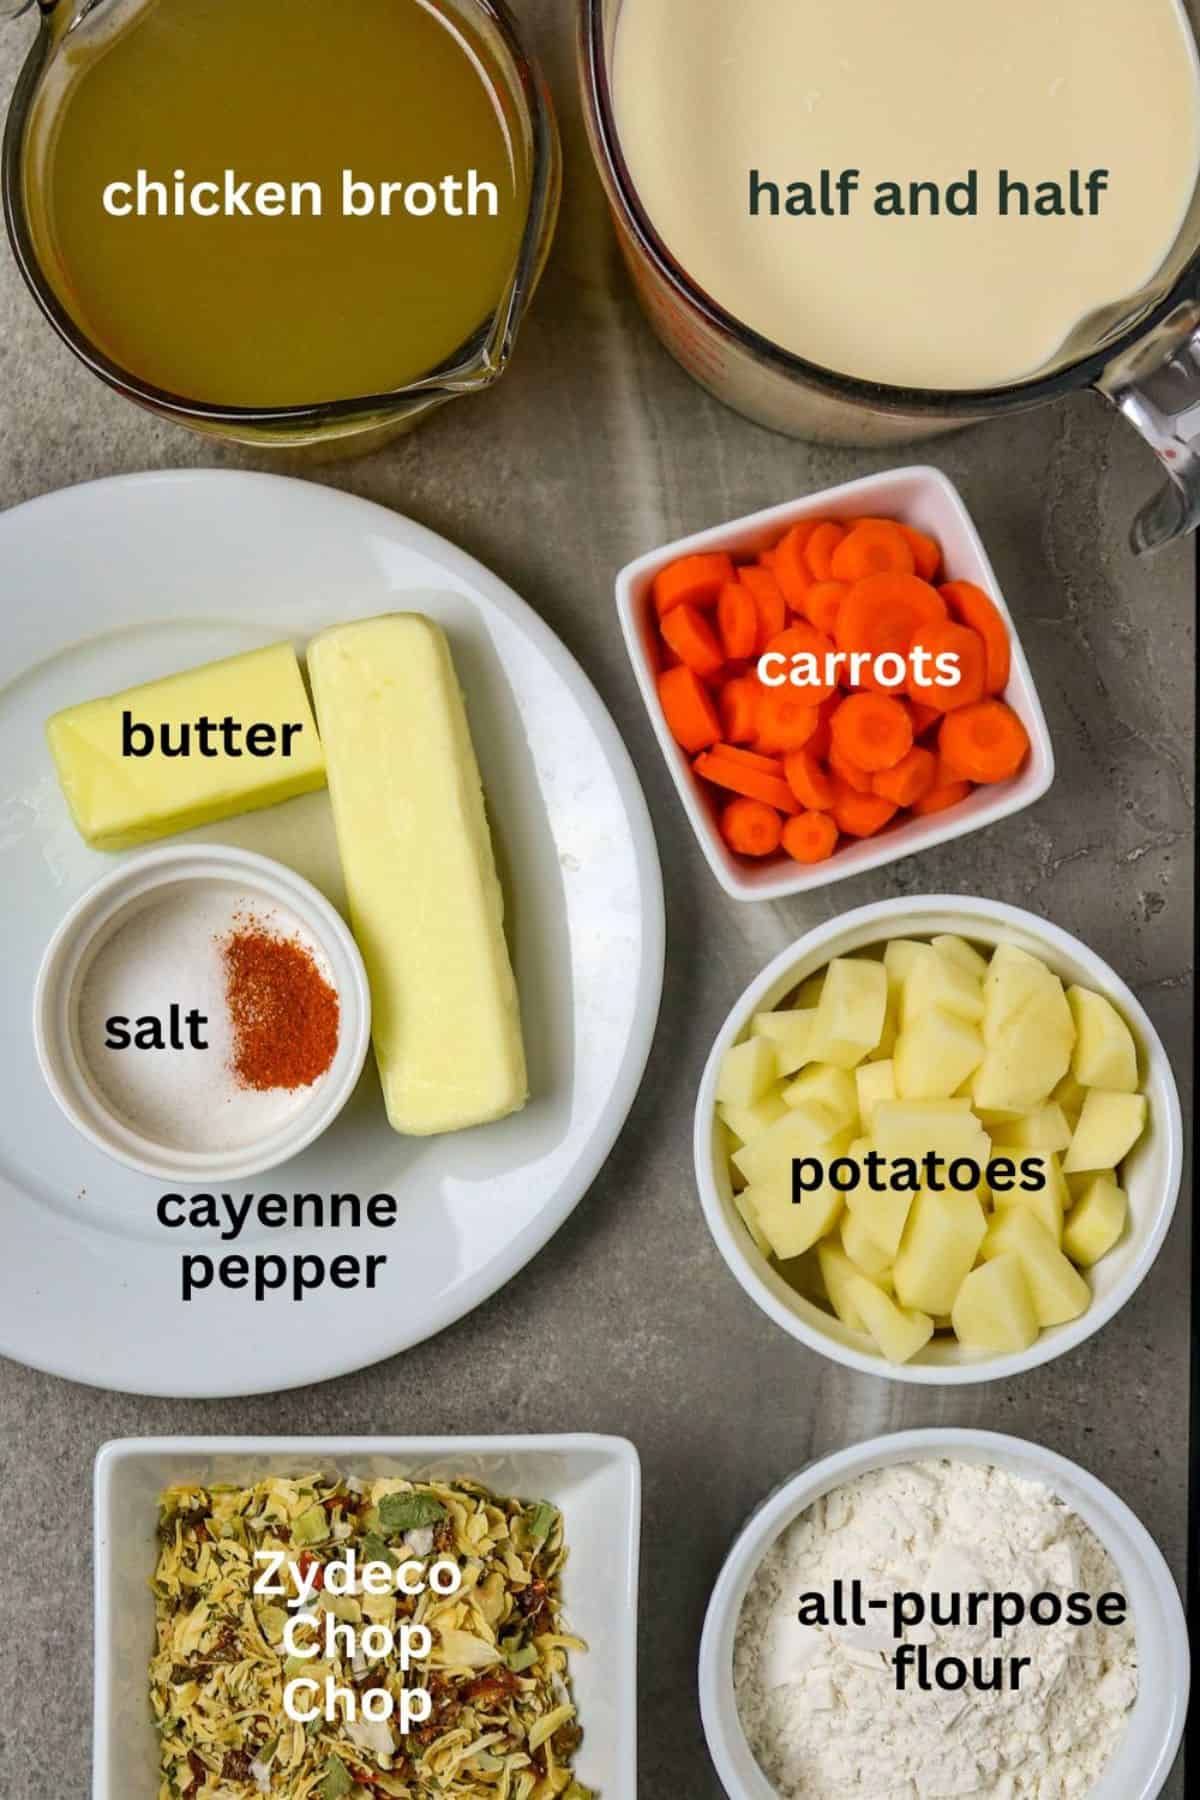 Different ingredients of carrots, potatoes, butter seasonings, half and half, flour, and chicken broth for Creamy Potato And Carrot Soup.